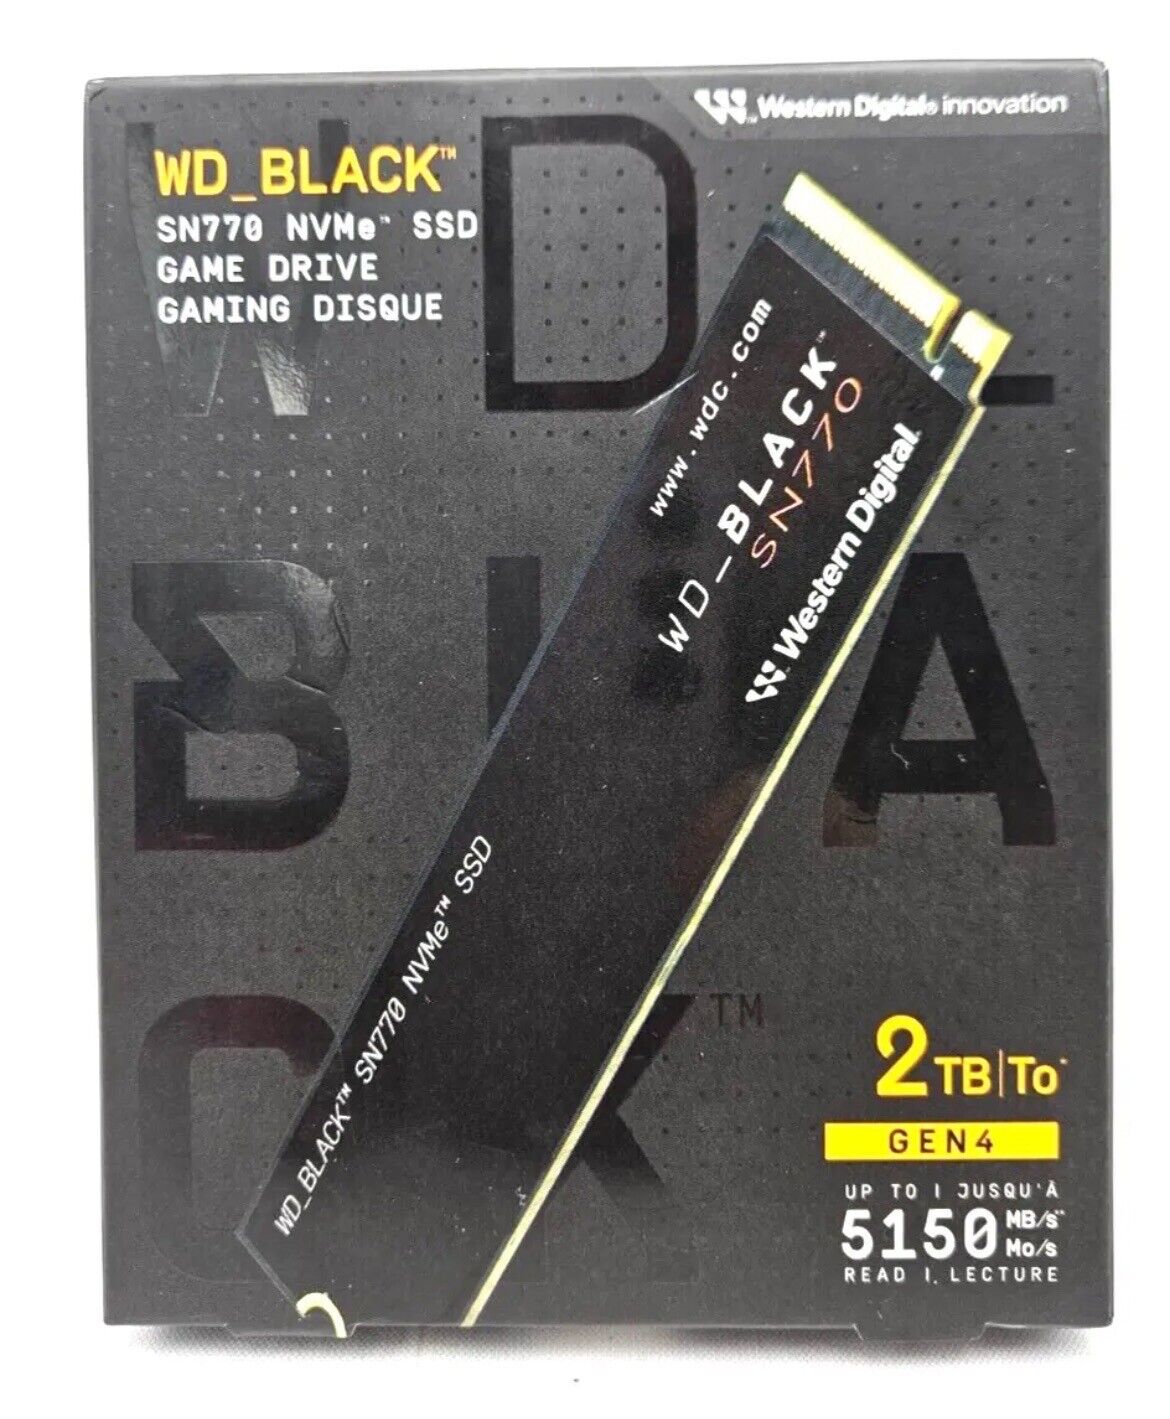 NEW WD Black SN770 NVMe SSD Game Drive 2 TB Gen4 Up to 5150 MB/s Read PC Laptop